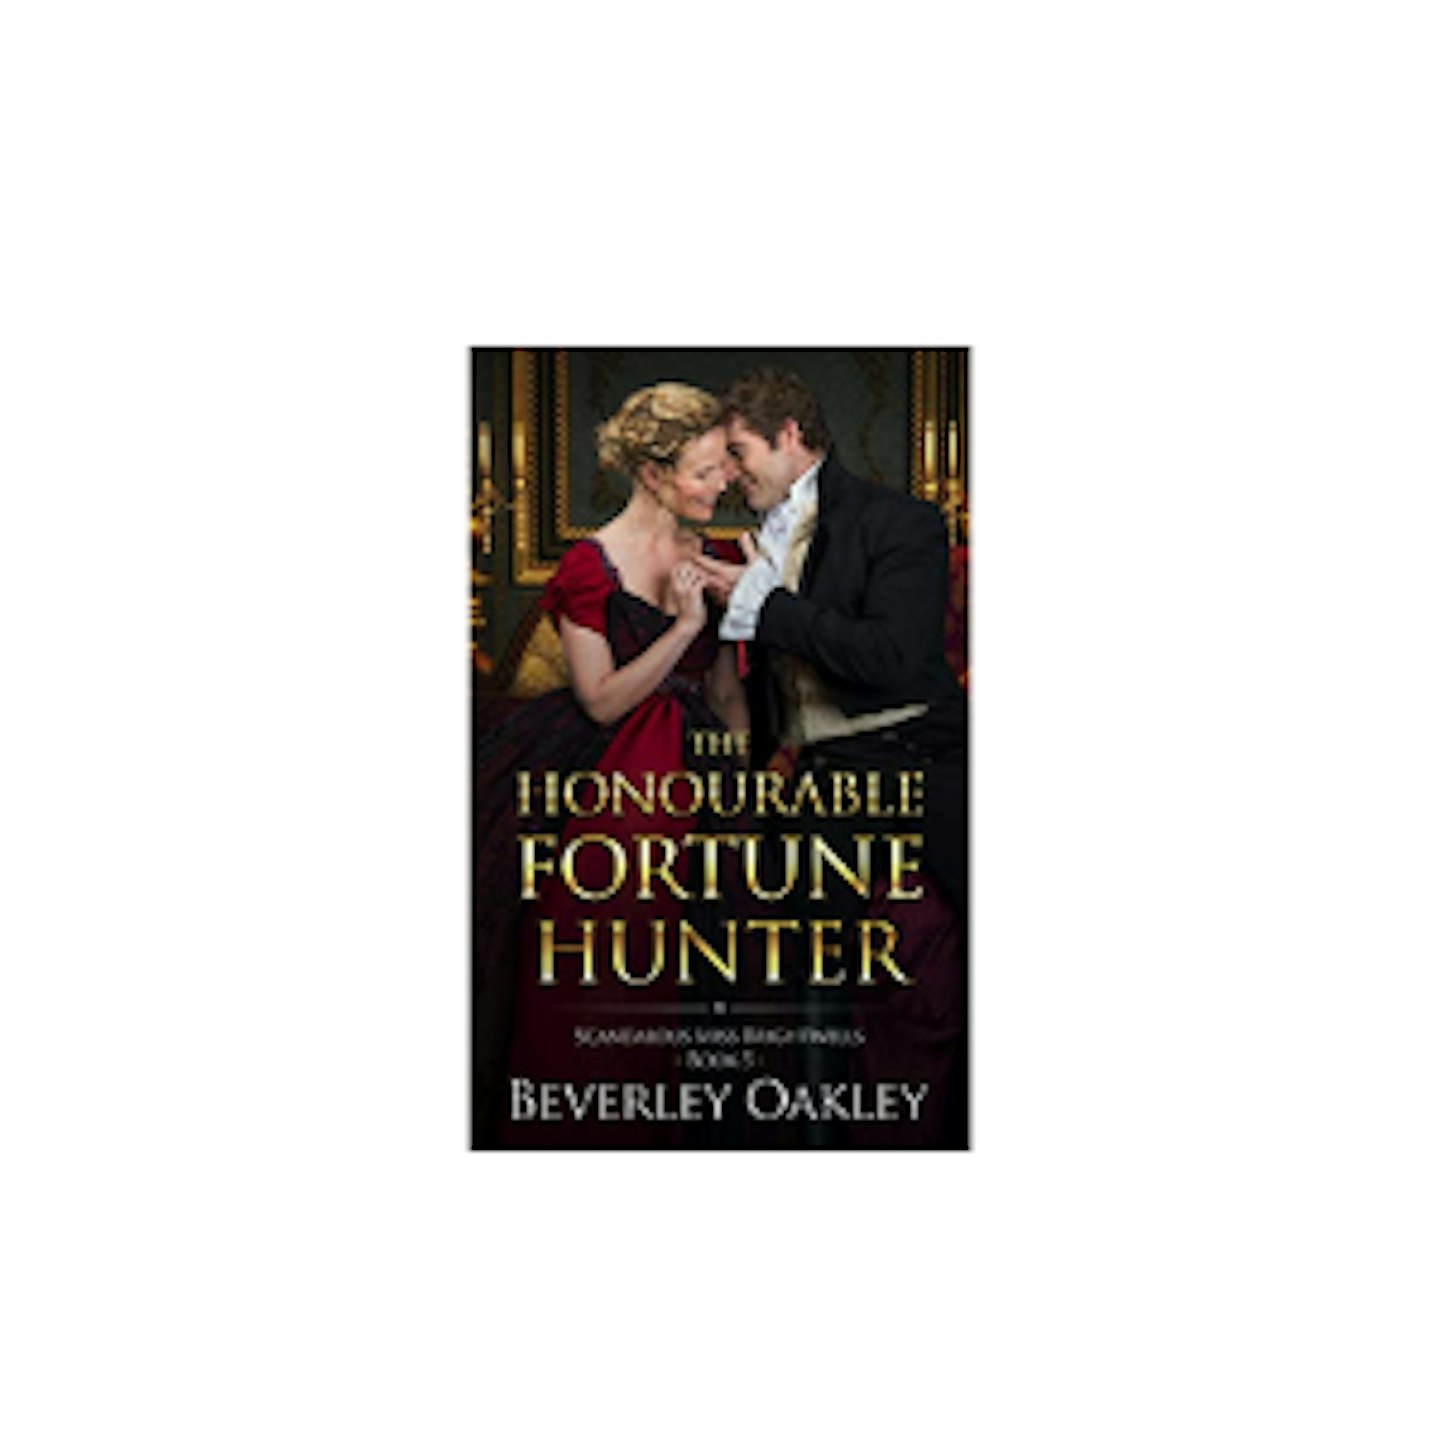 The Honourable Fortune Hunter: A matchmaking Regency Romance (Scandalous Miss Brightwell Series Book 5) Kindle Edition